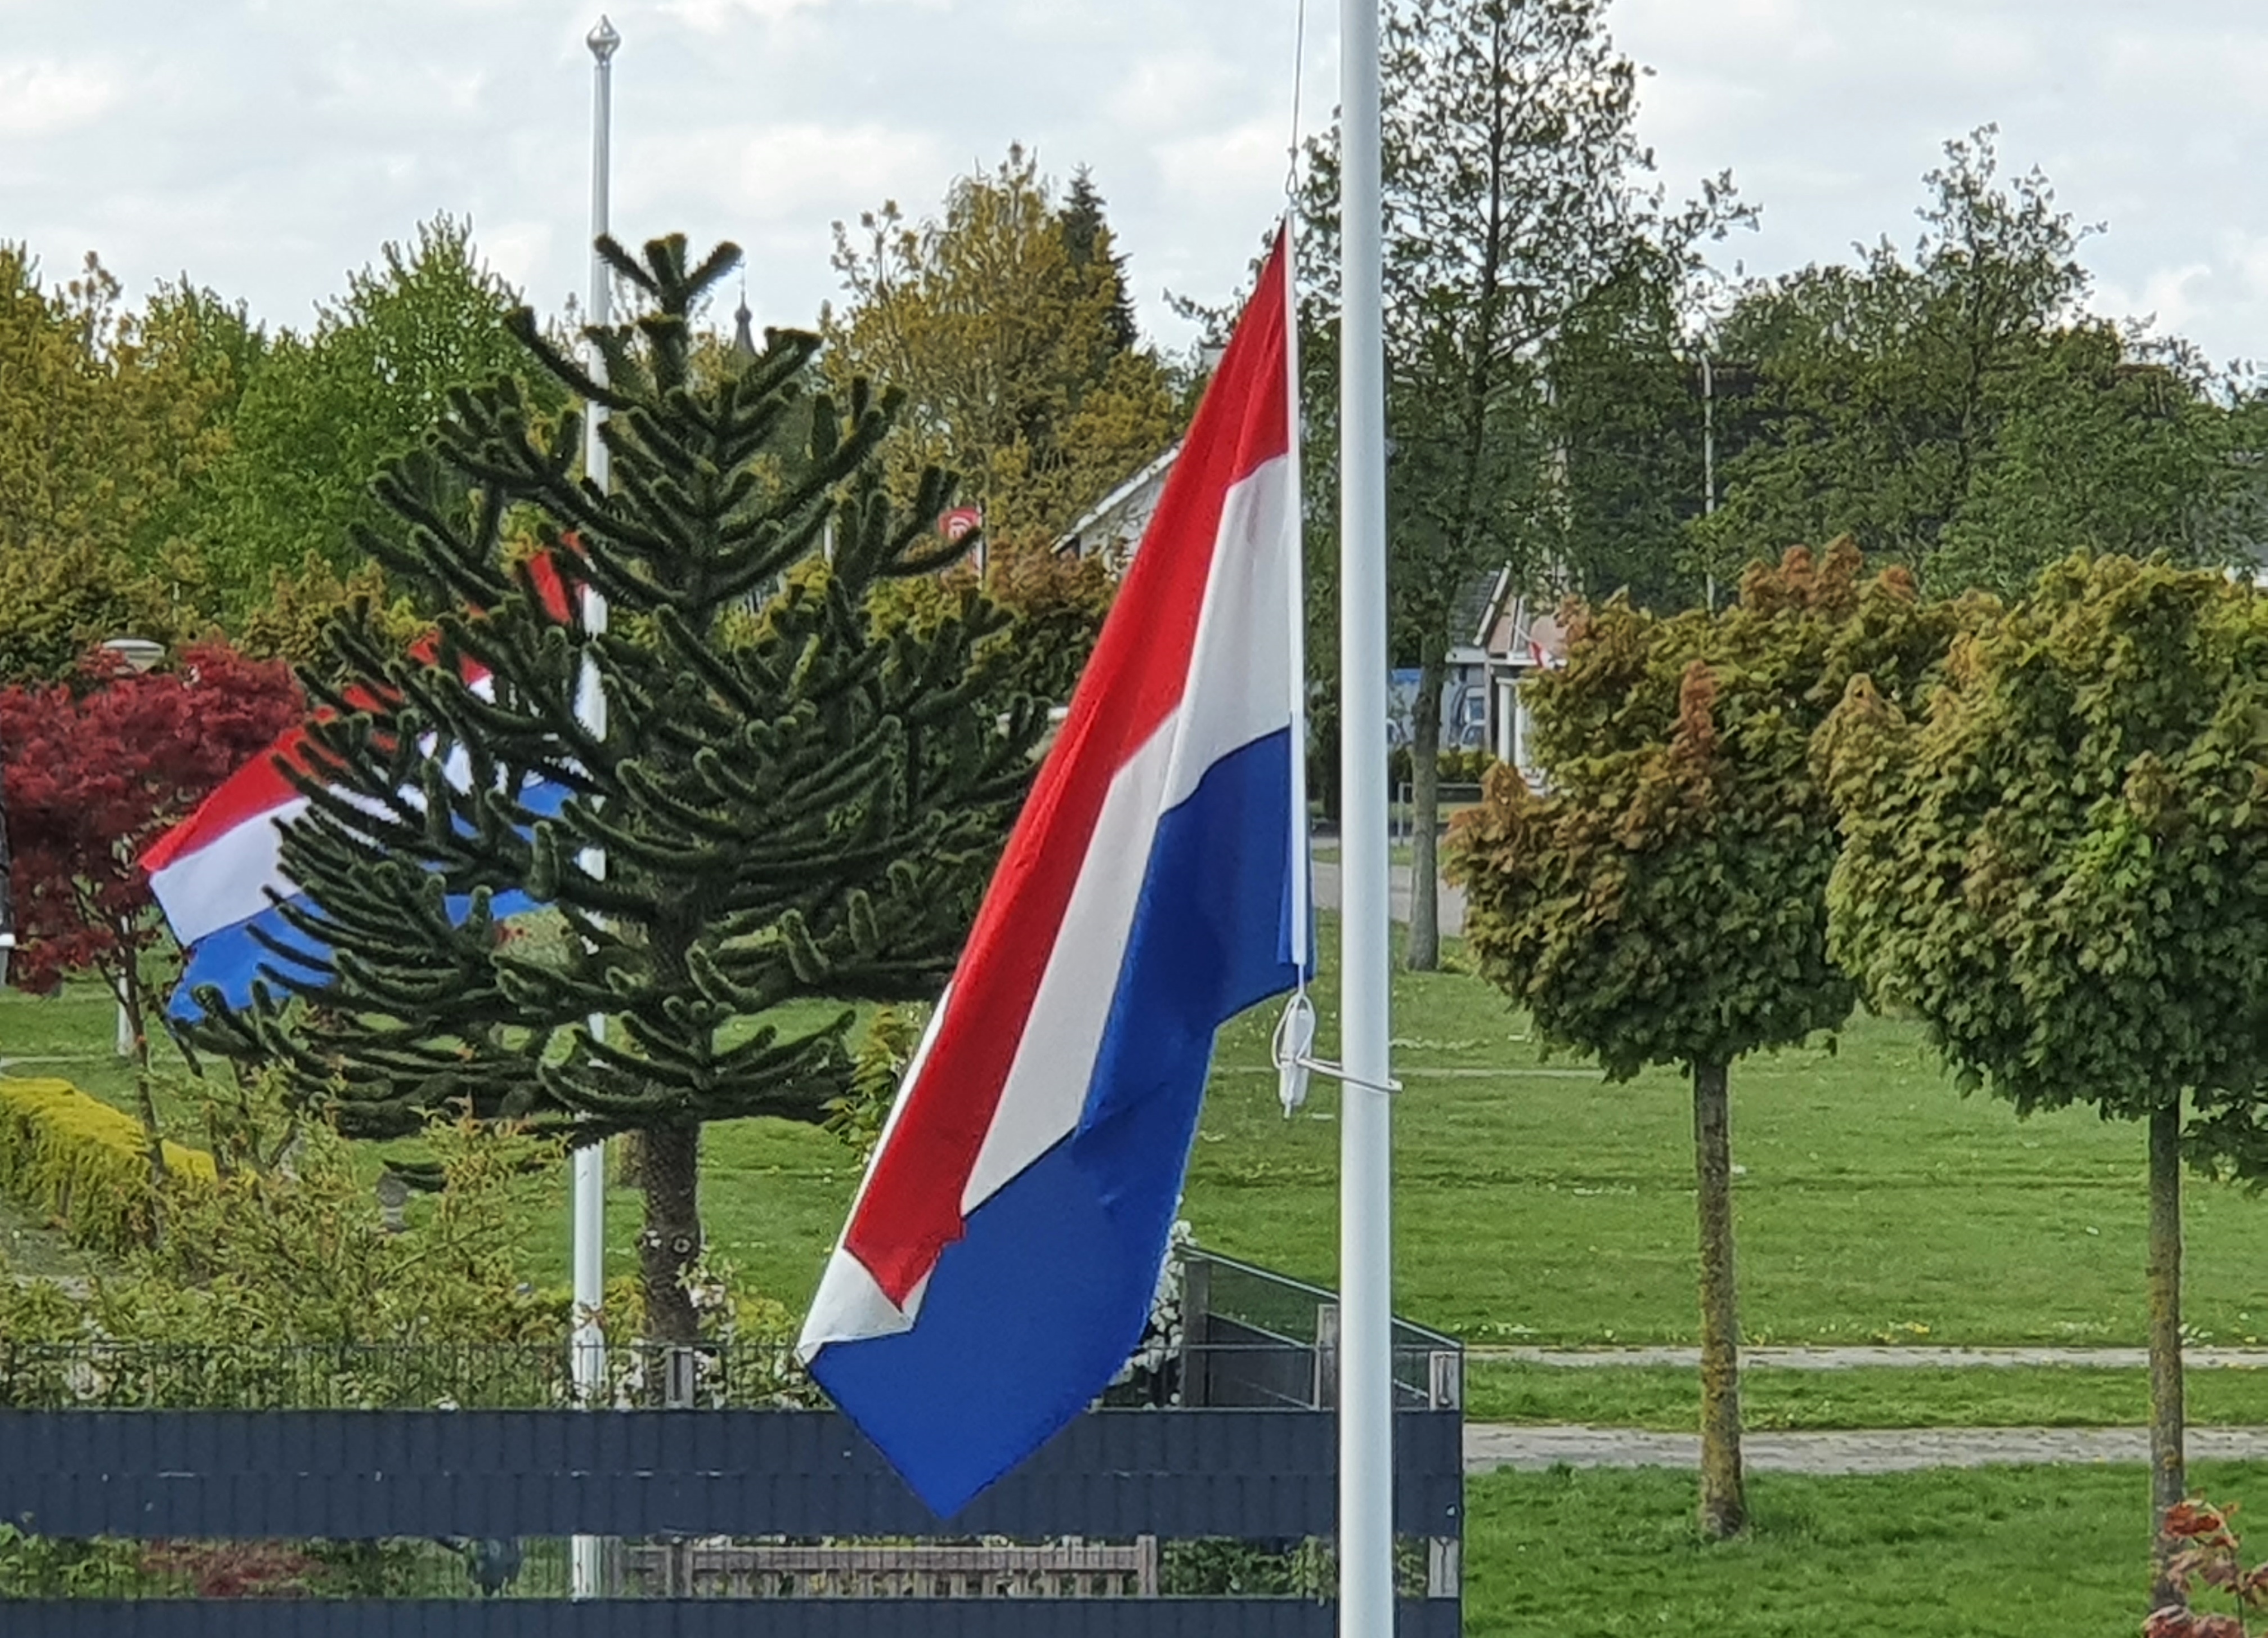 Red-white-blue flags on flagpoles